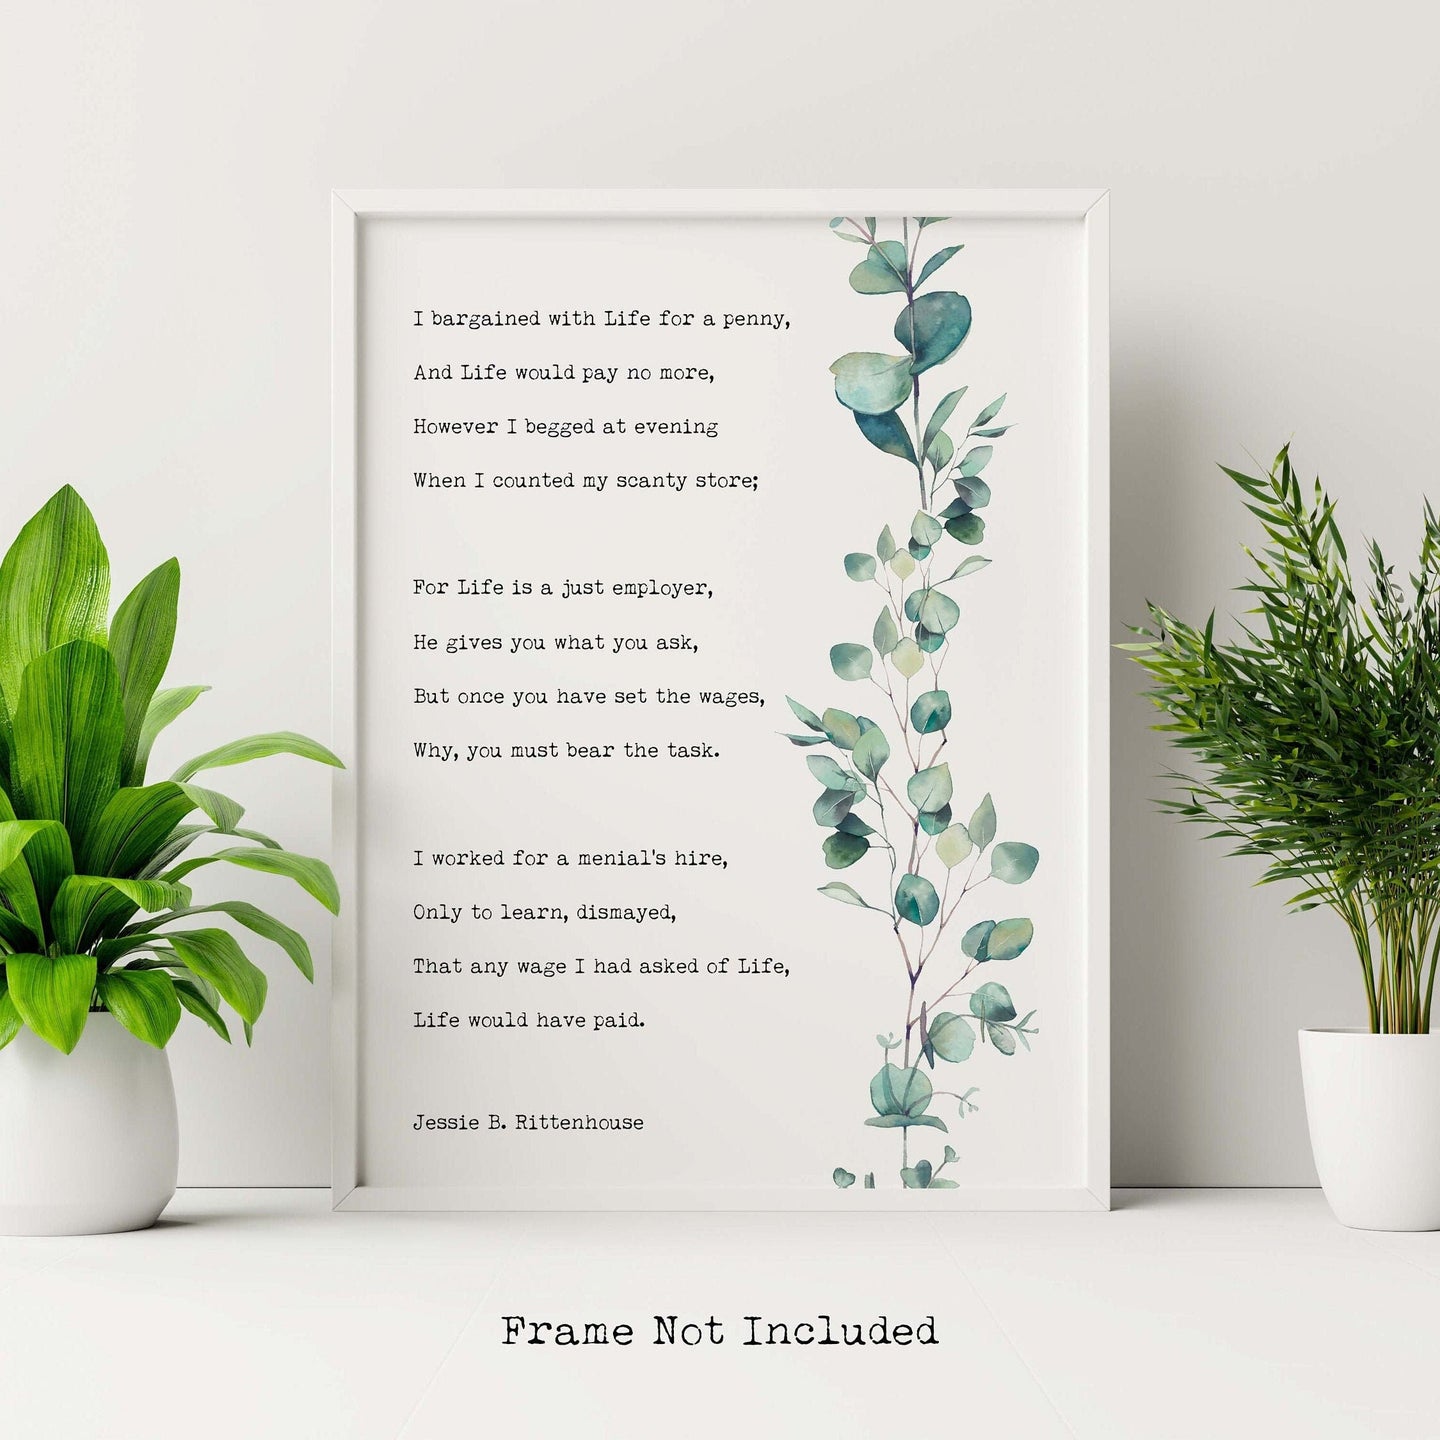 I bargained with Life for a penny - Jessie B. Rittenhouse - Poem about self worth - Think and Grow Rich - Desk Decoration - Unframed print